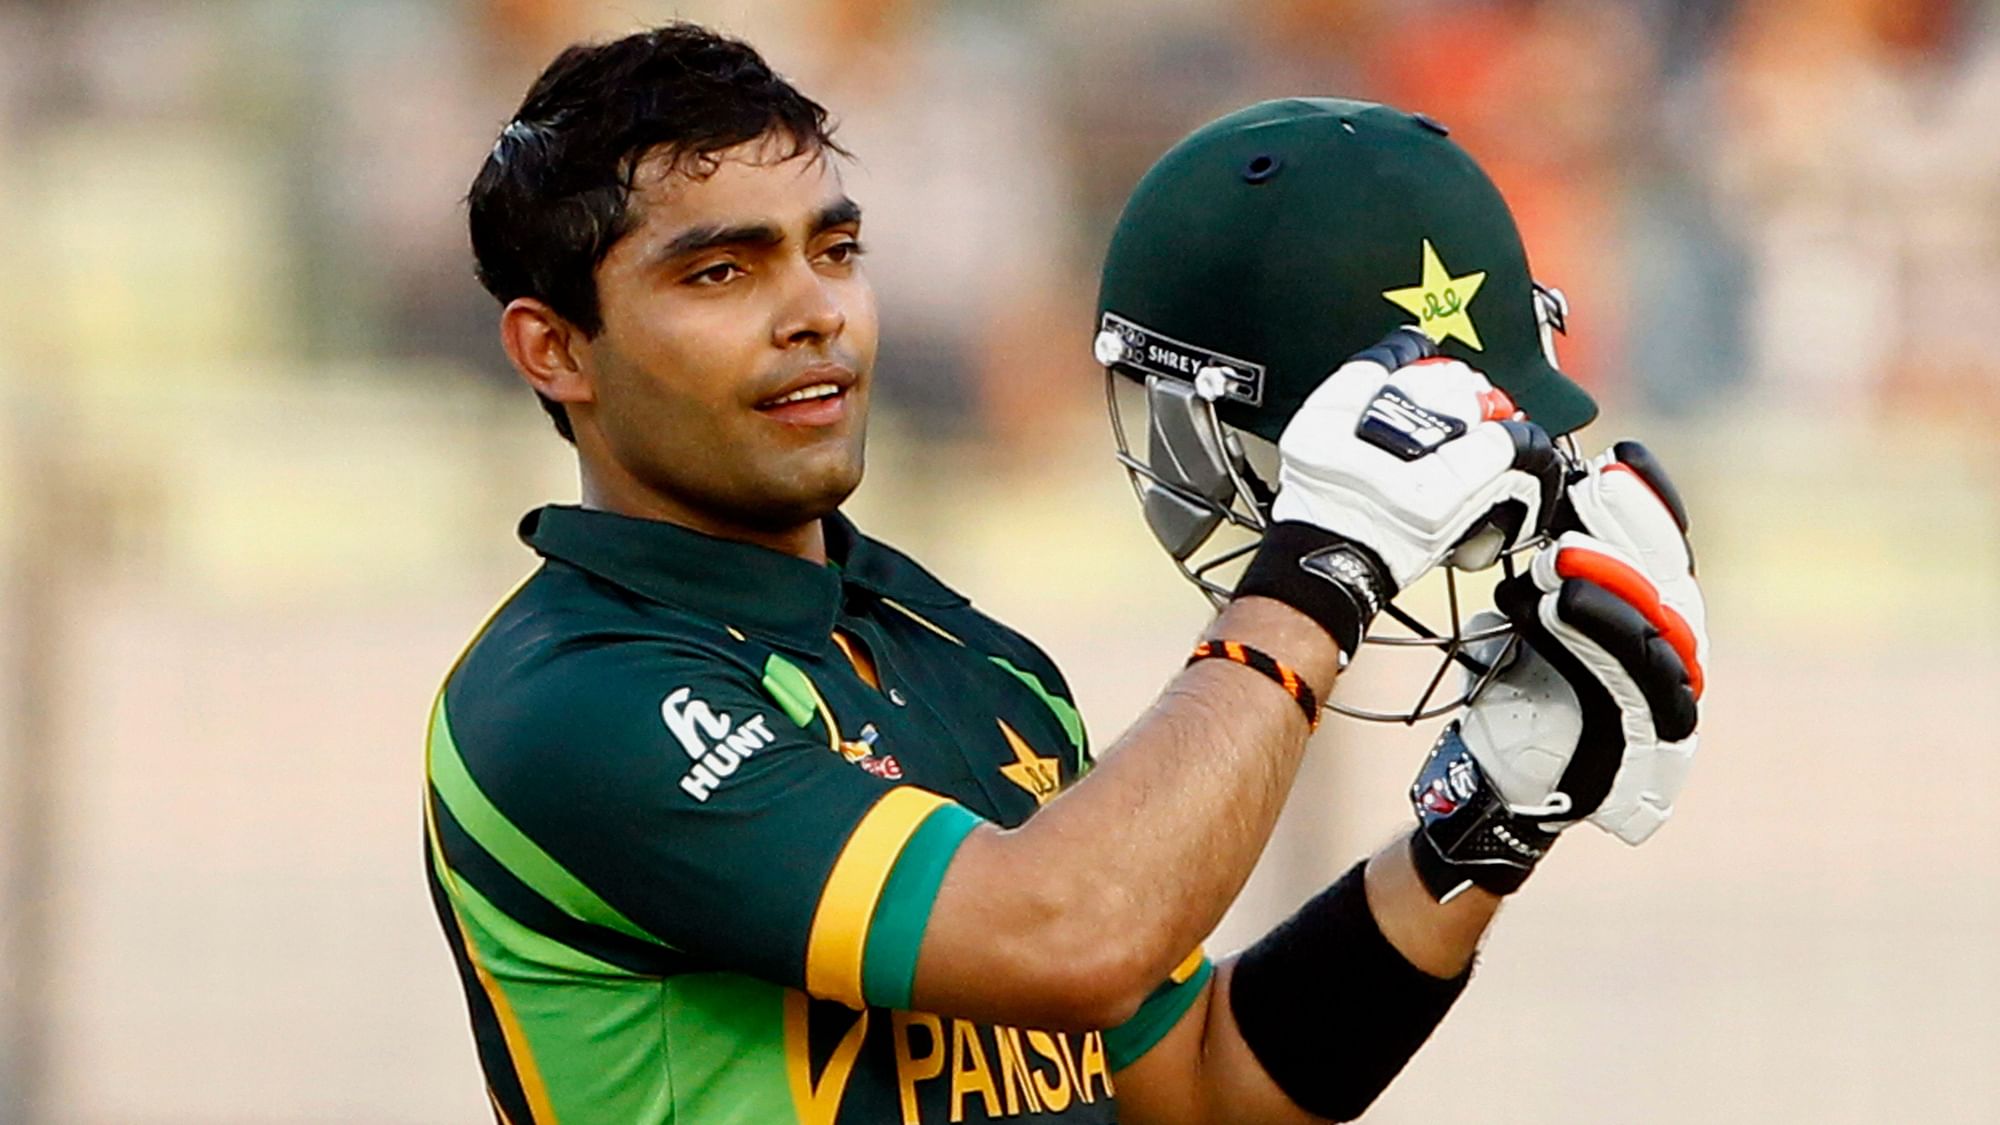 Umar Akmal has featured in 16 Tests, 121 ODIs and 84 T20Is for Pakistan.